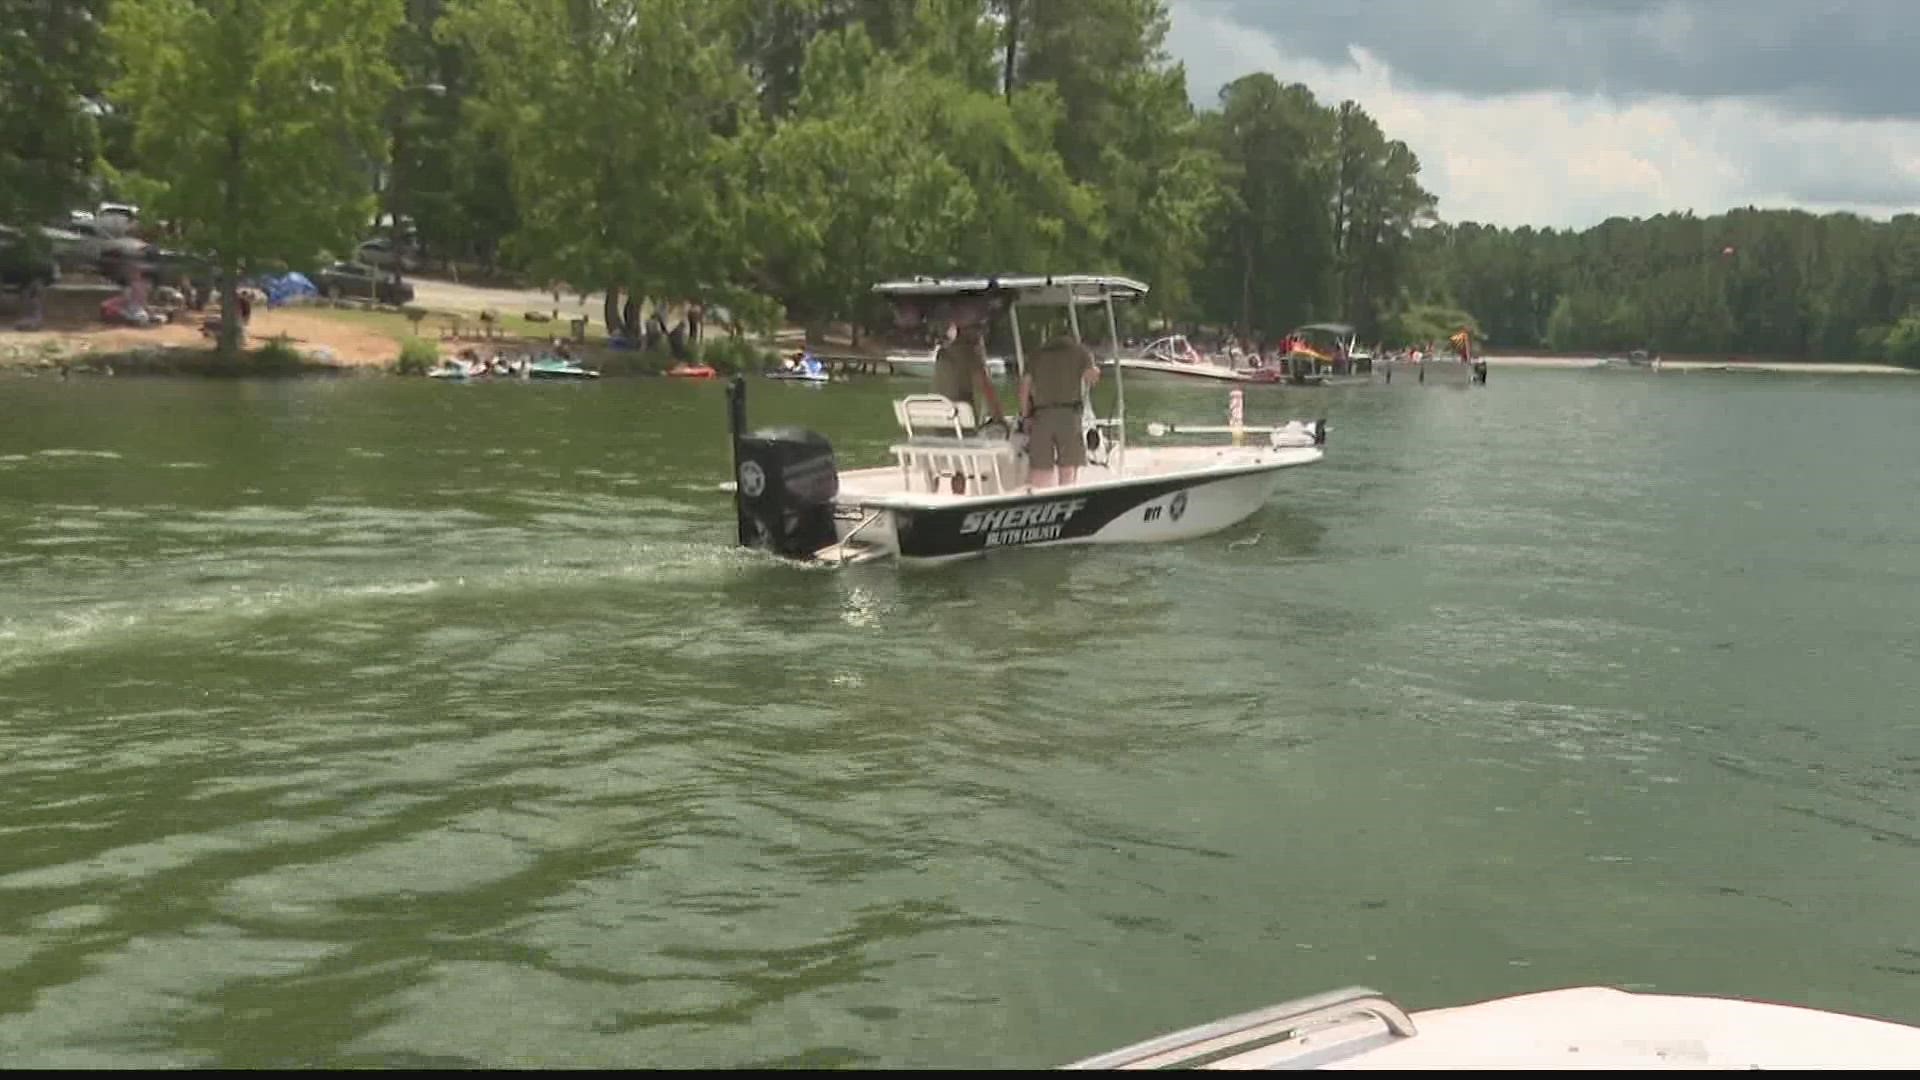 After a number of tragedies over the weekend, DNR patrols are out on Georgia lakes in full force.